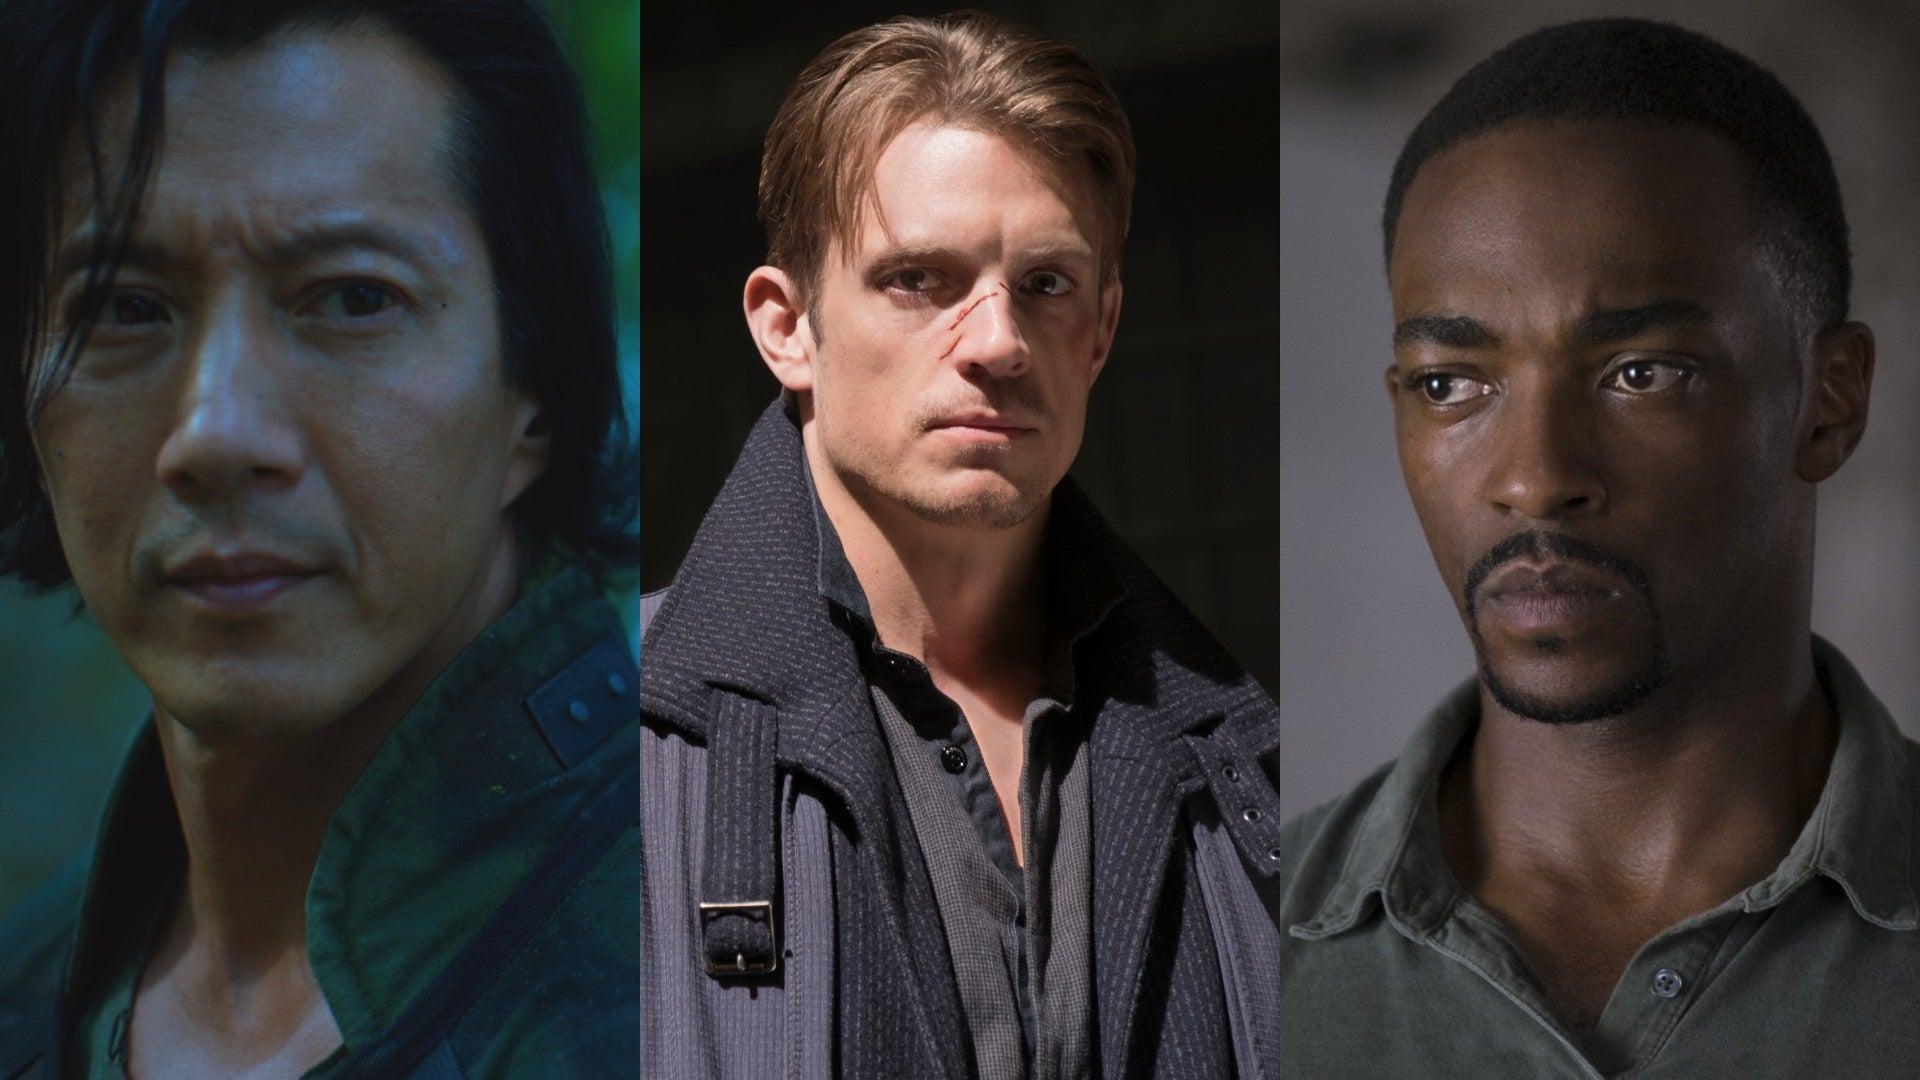 Altered Carbon Season 2: Cast, Release Date, Story, and More